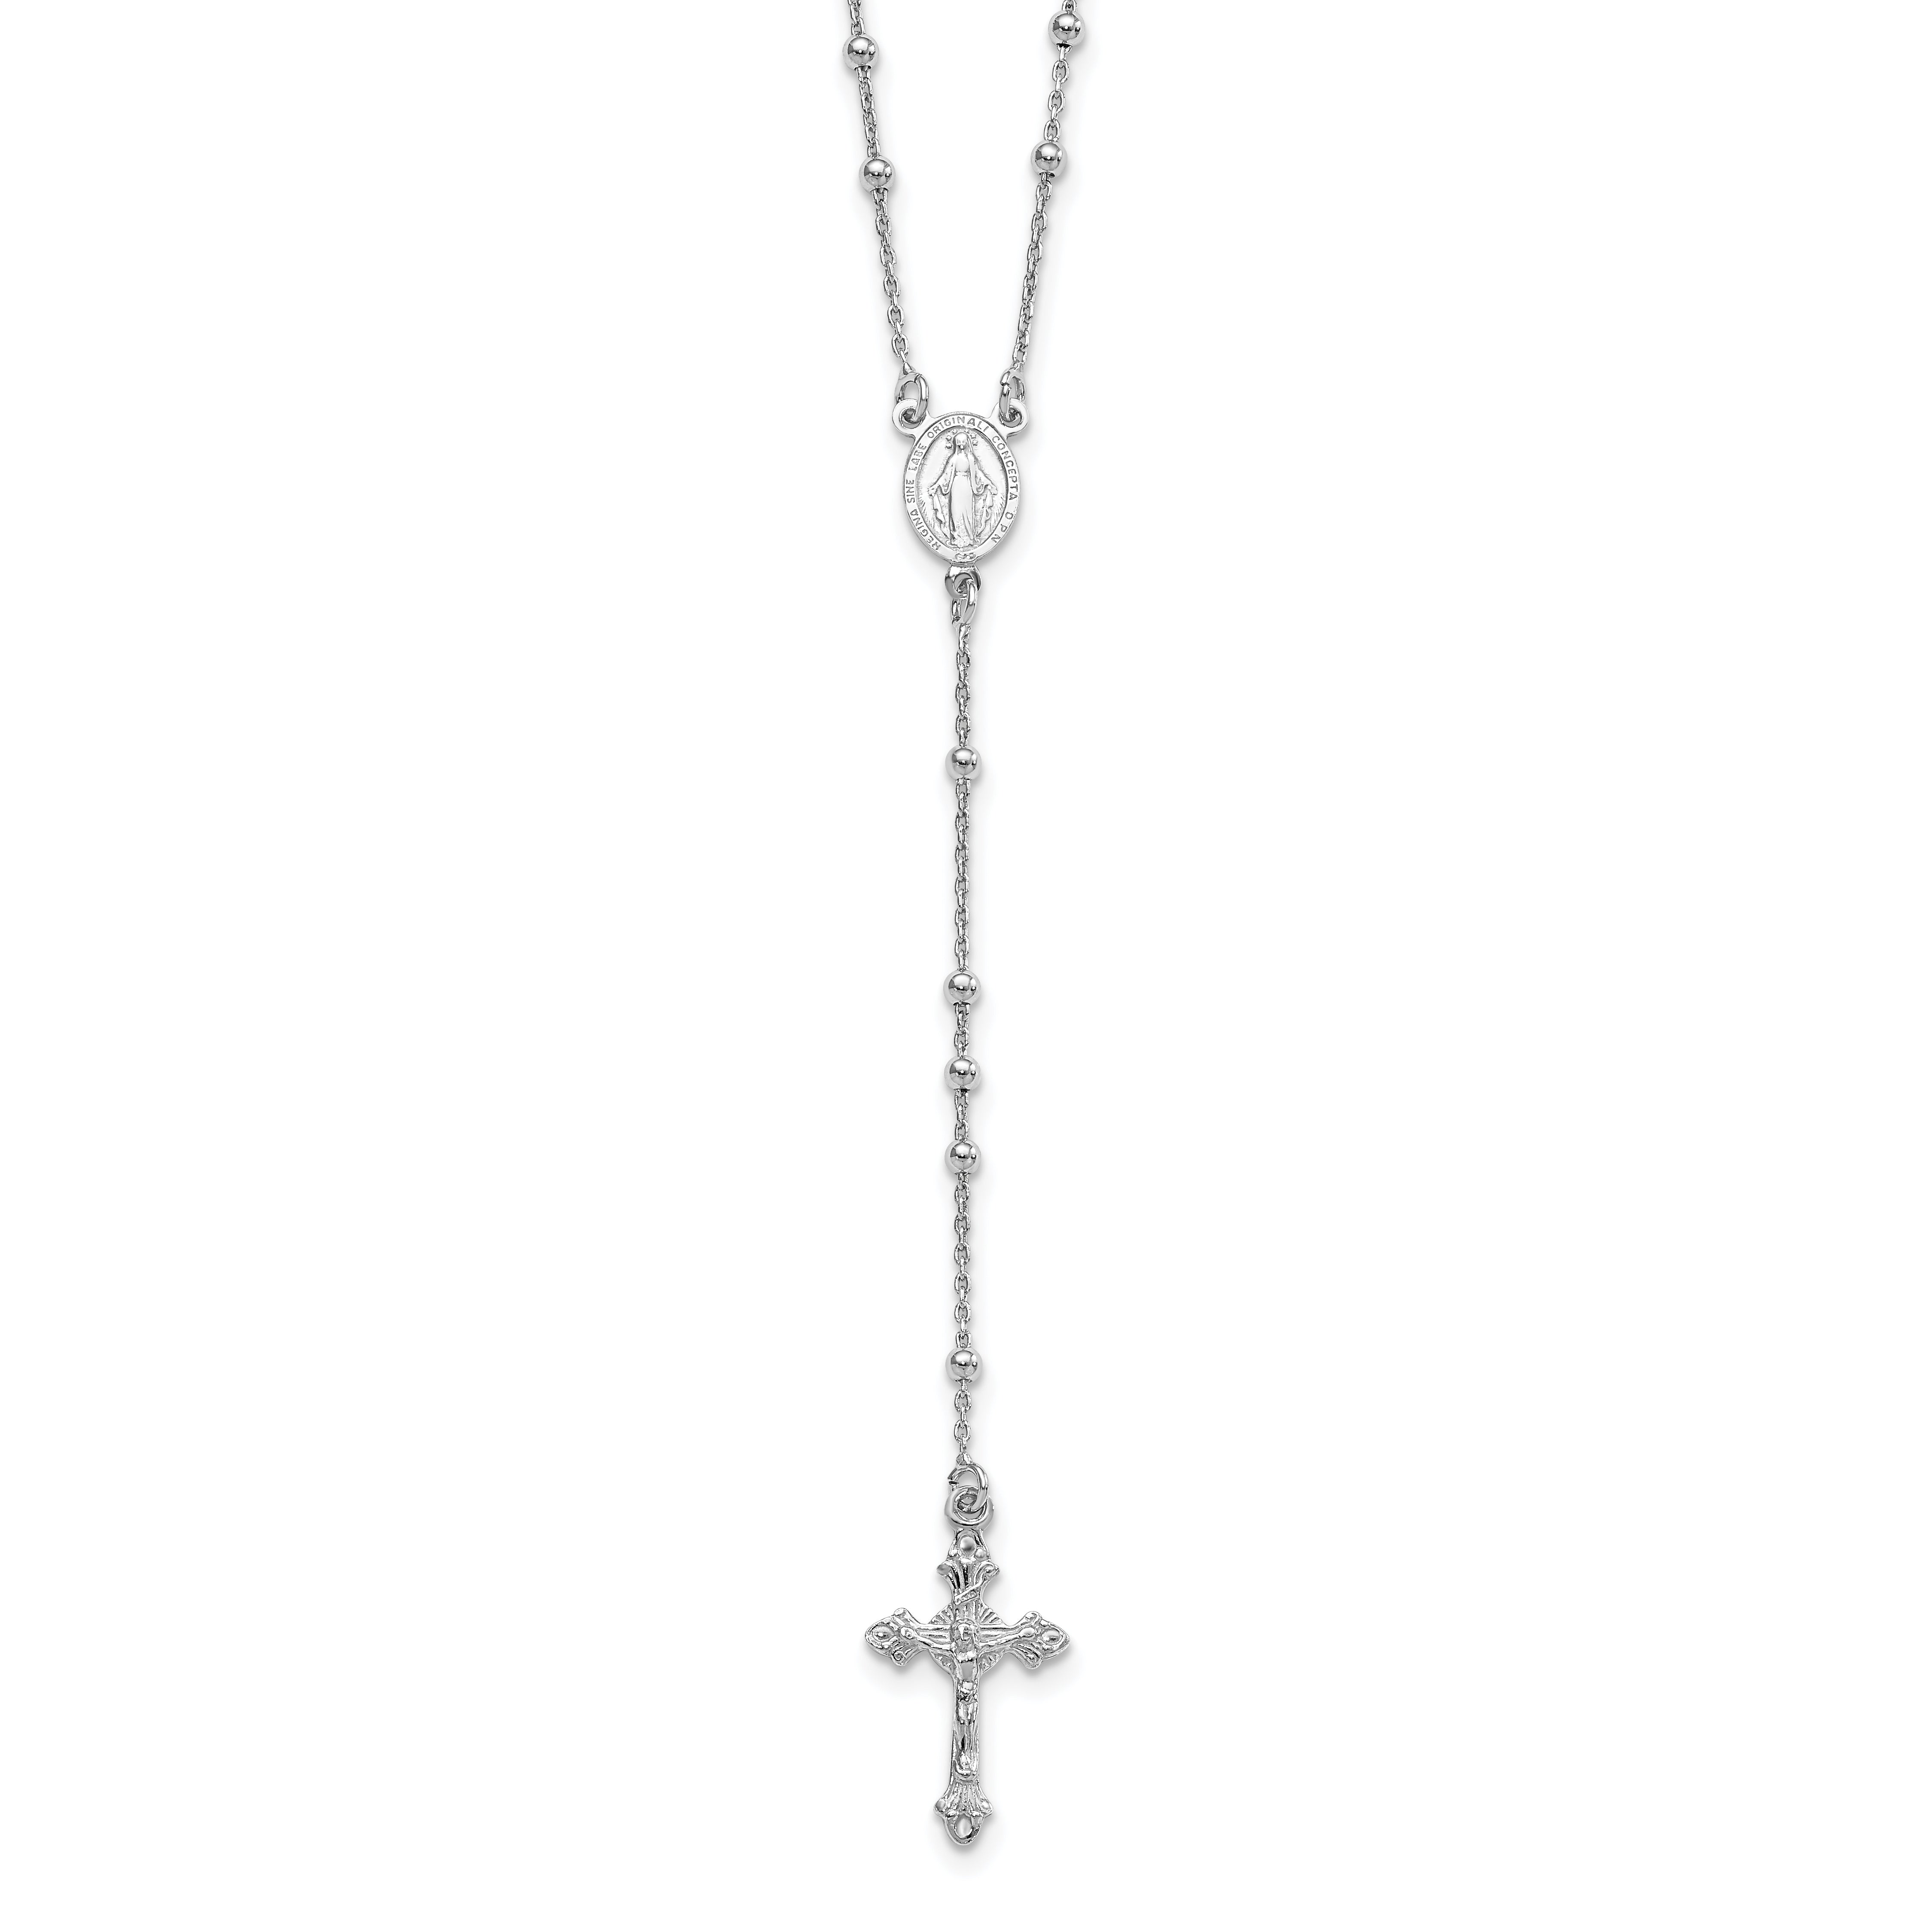 Sterling Silver Rhodium-plated Polished Beaded Rosary 24 inch Necklace